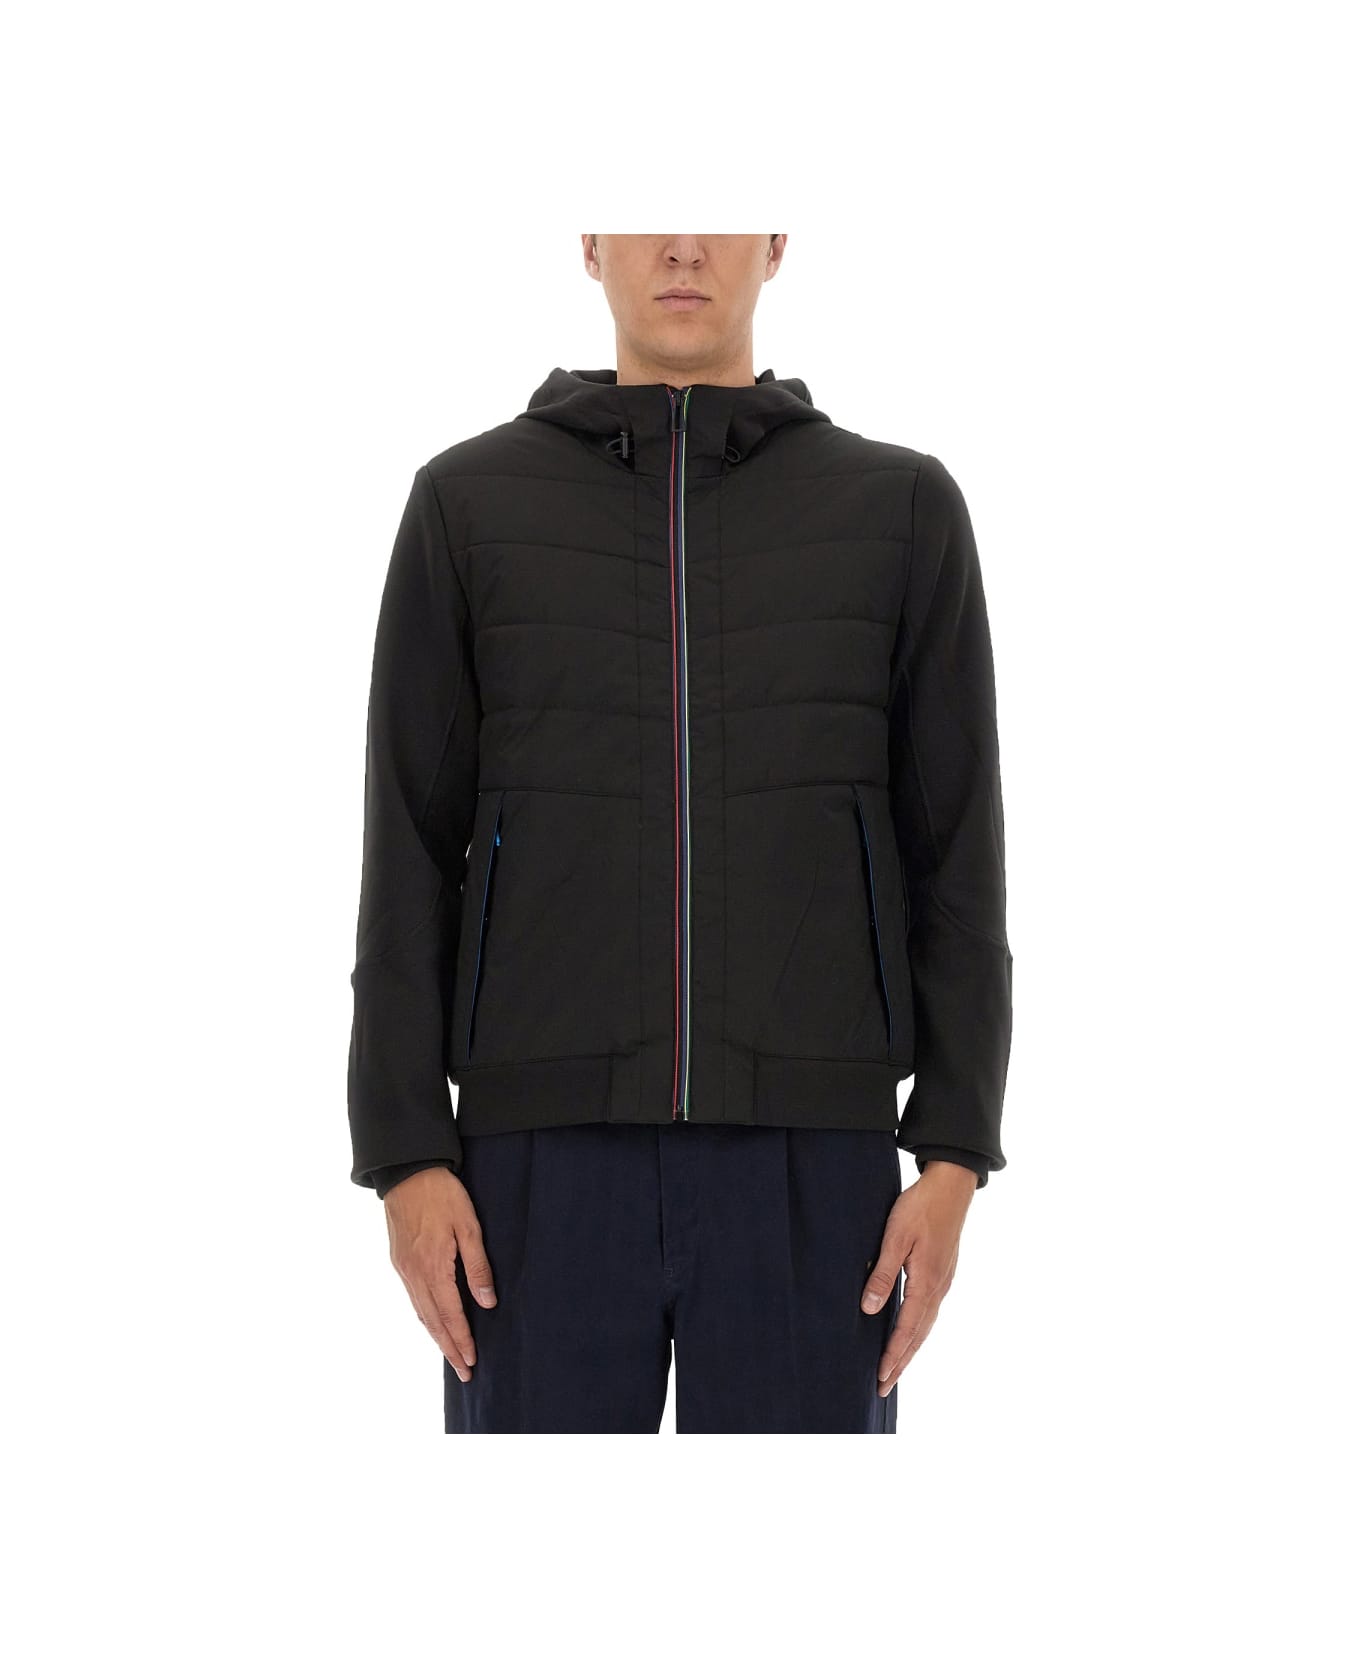 PS by Paul Smith Hooded Jacket - Black